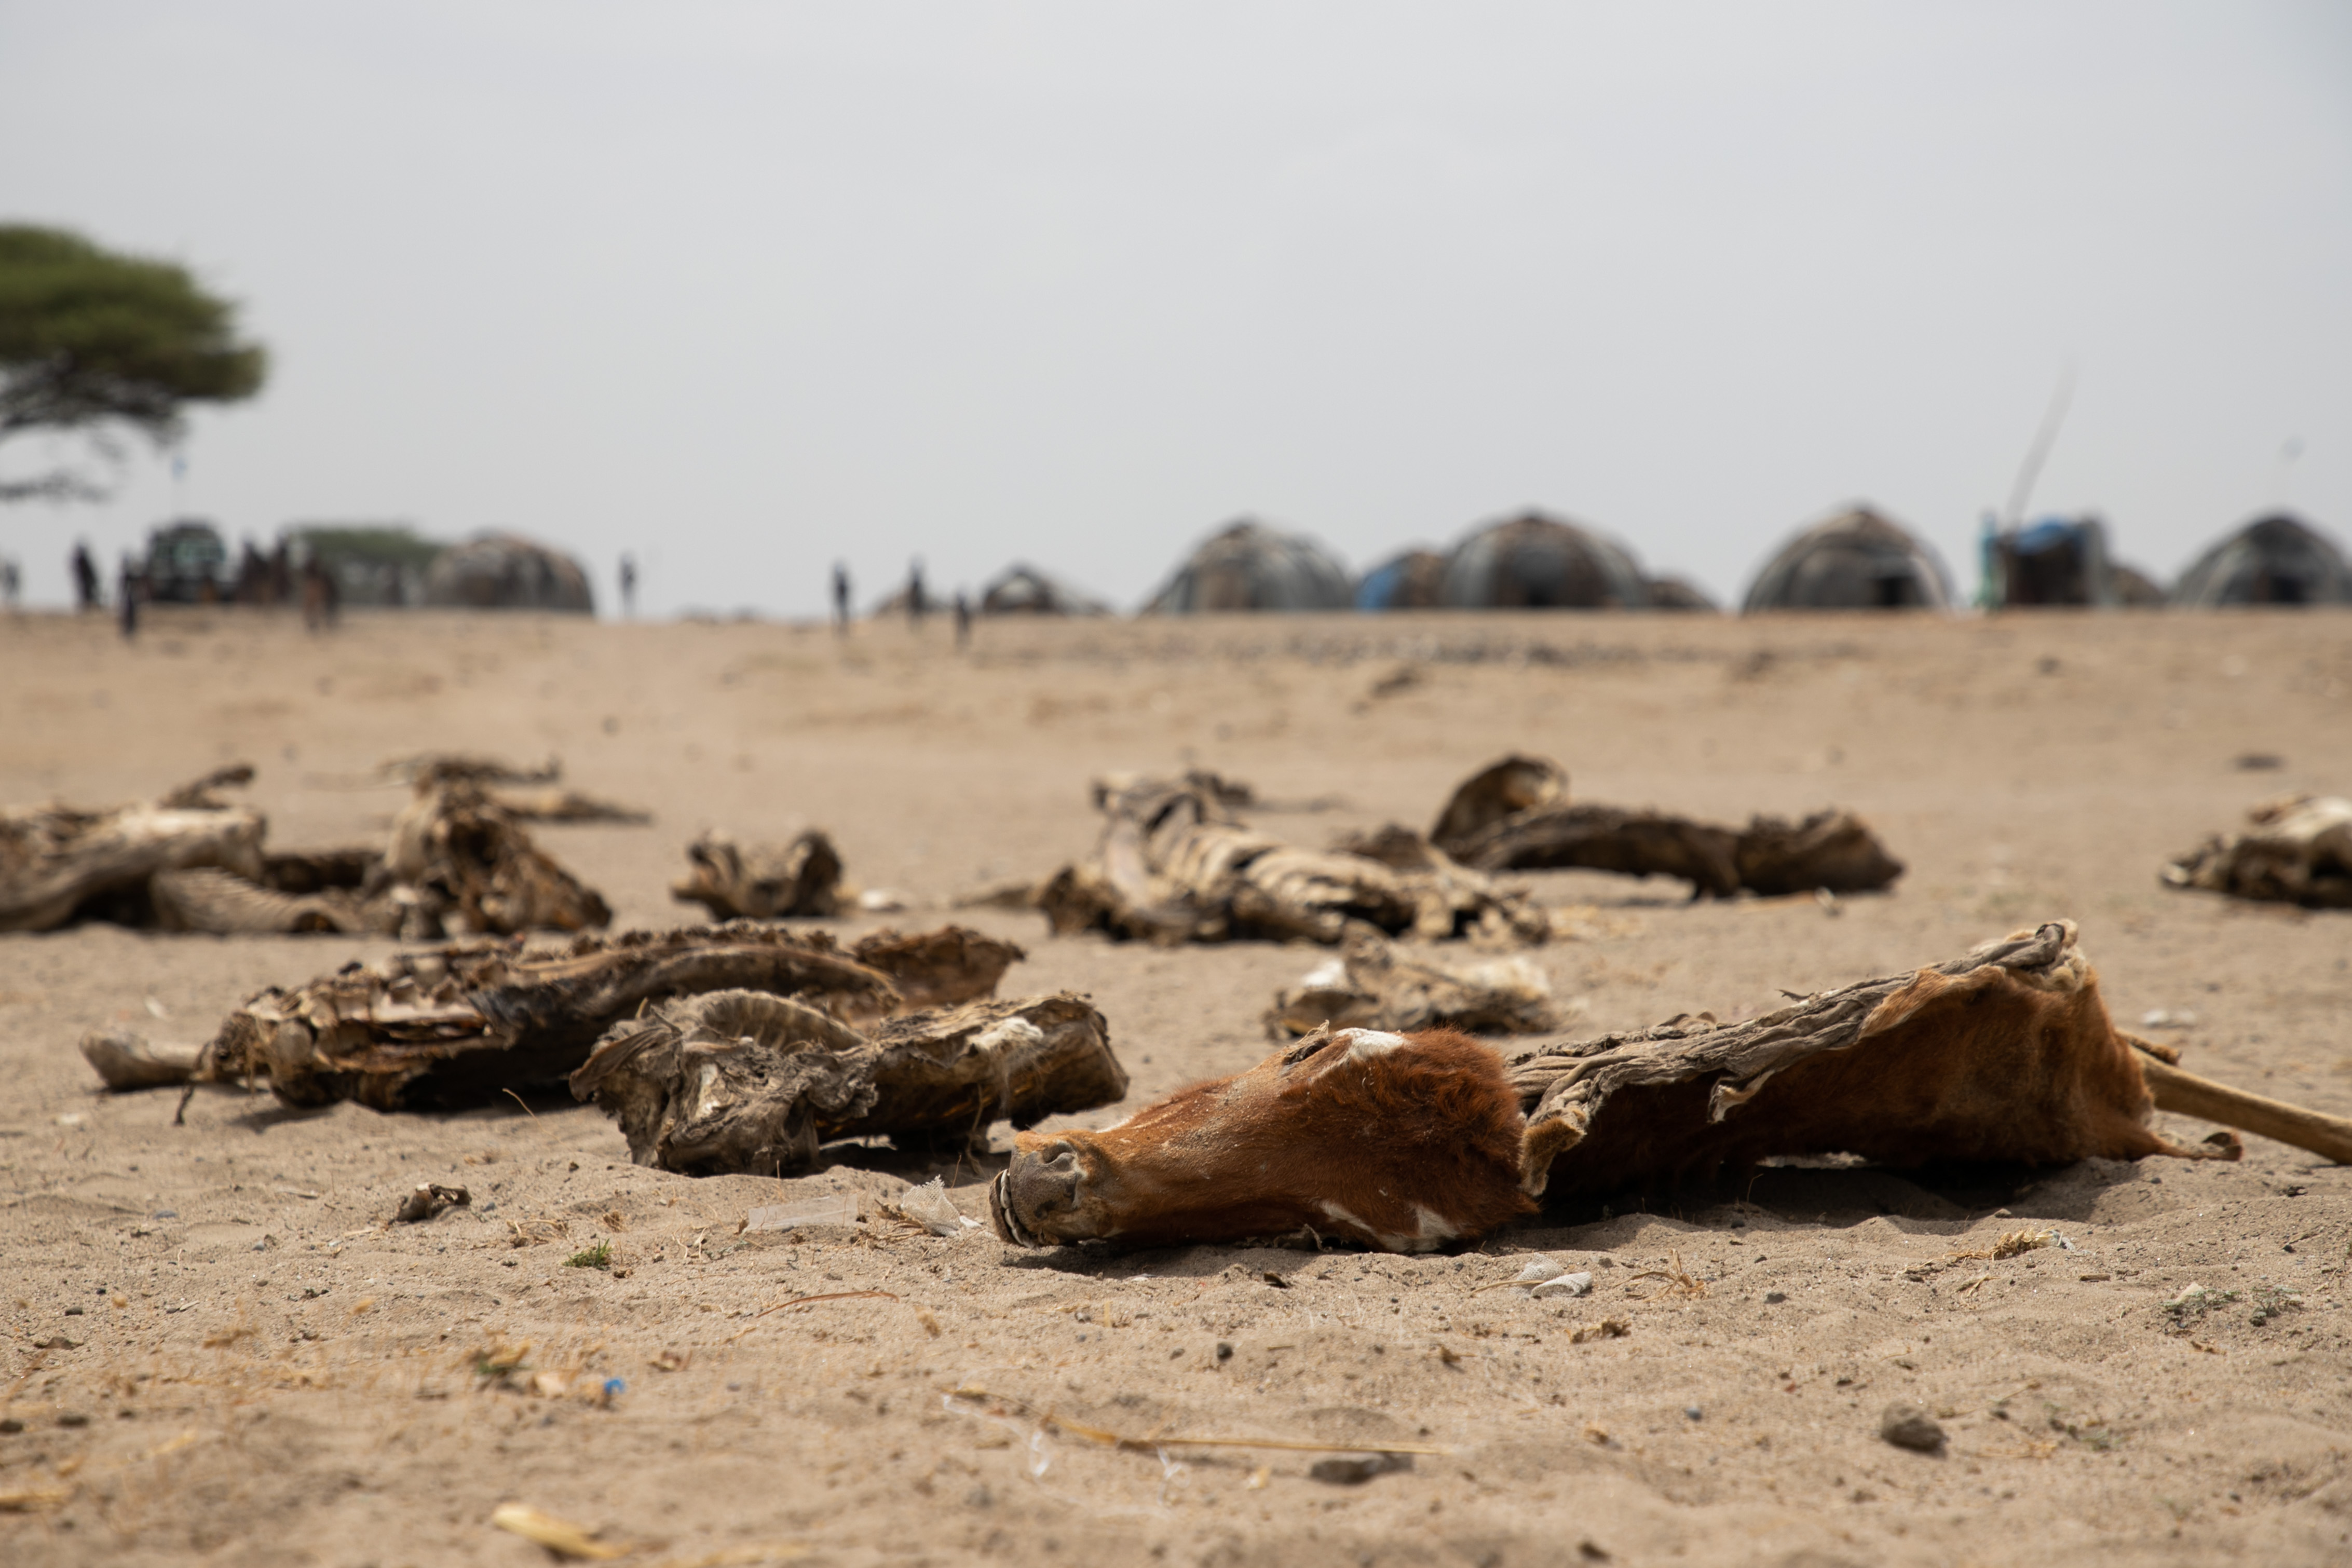 The bodies of cattle killed by devastating drought in Ethiopia, South Omo, 23 February 2022. In the vast lowland part of the country in South Omo, communities have suffered high death rates among their cattle as a result of the severe drought. Photo: Michael Tewelde / WFP